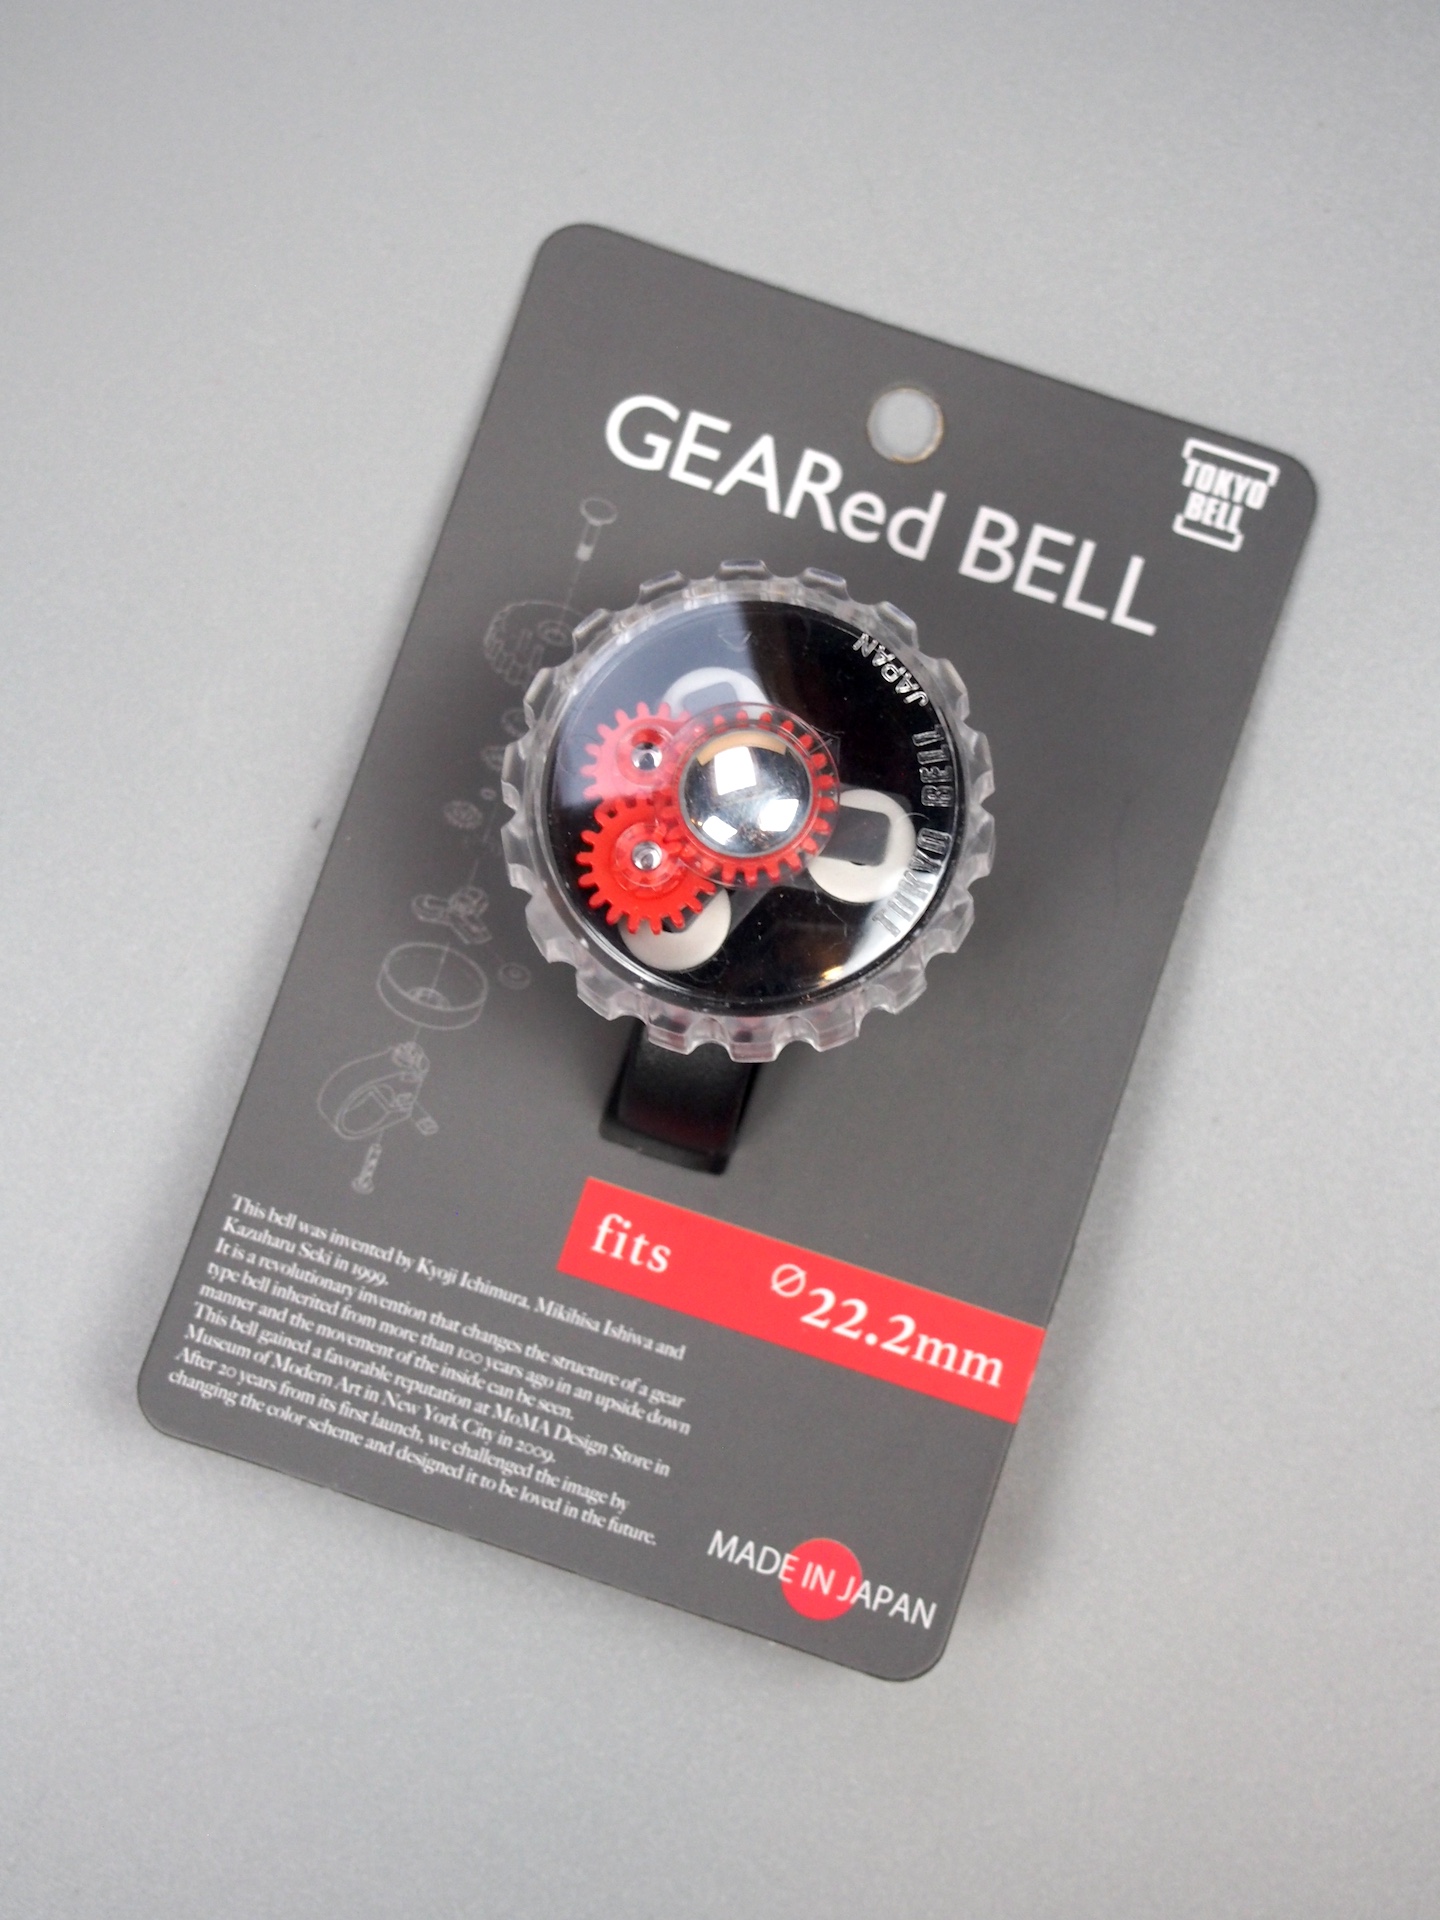 Tokyo Bell Geared bell – Clear & red